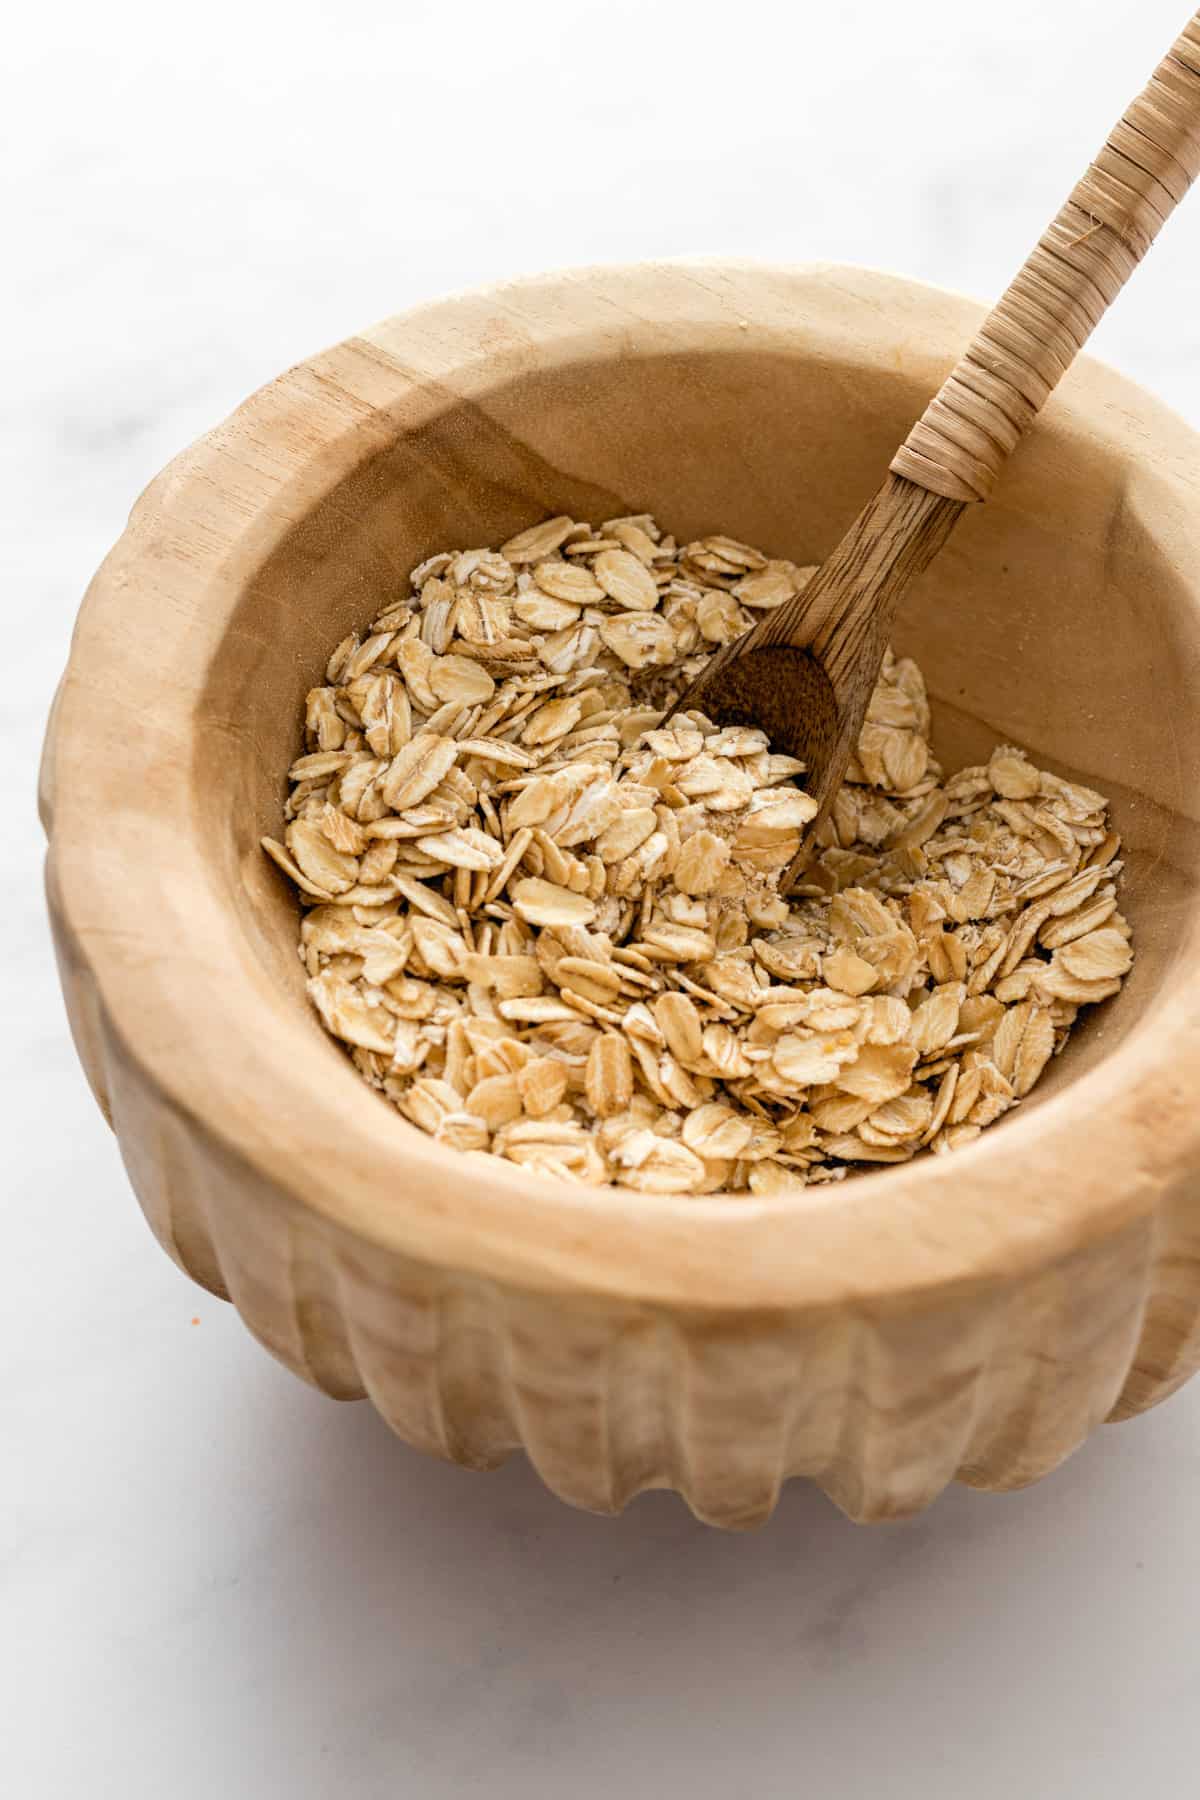 A wooden bowl and spoon with rolled oats.